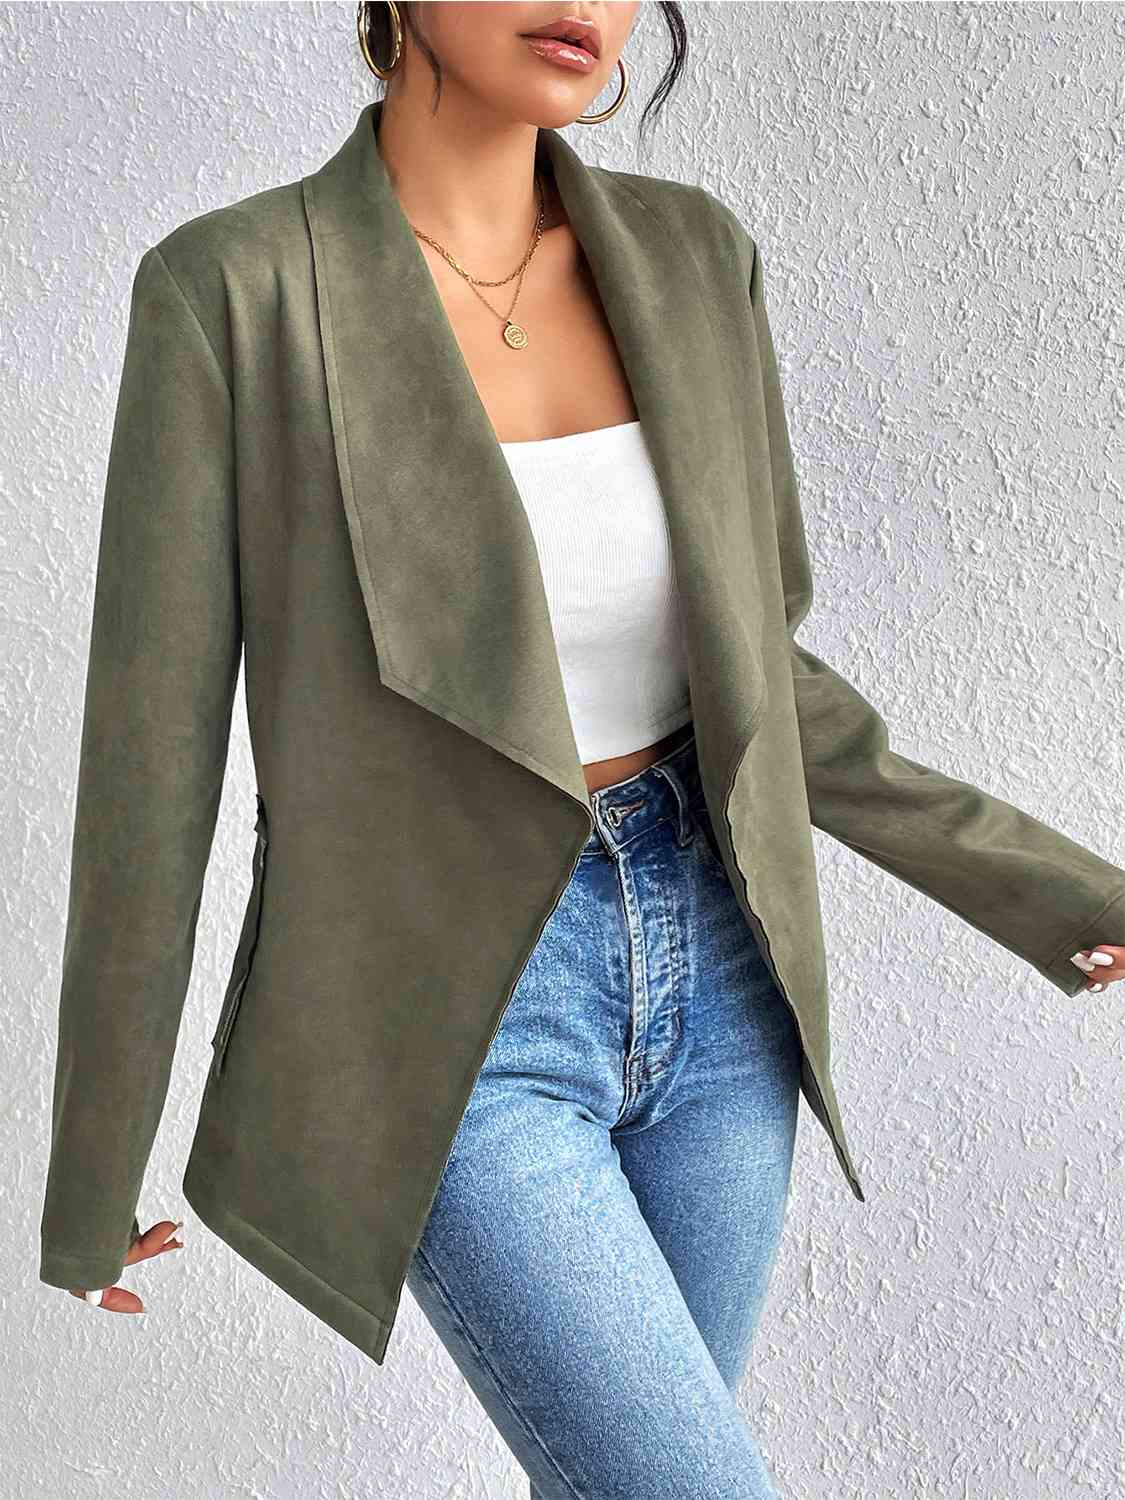 Statement Collar Long Sleeve Jacket Print on any thing USA/STOD clothes